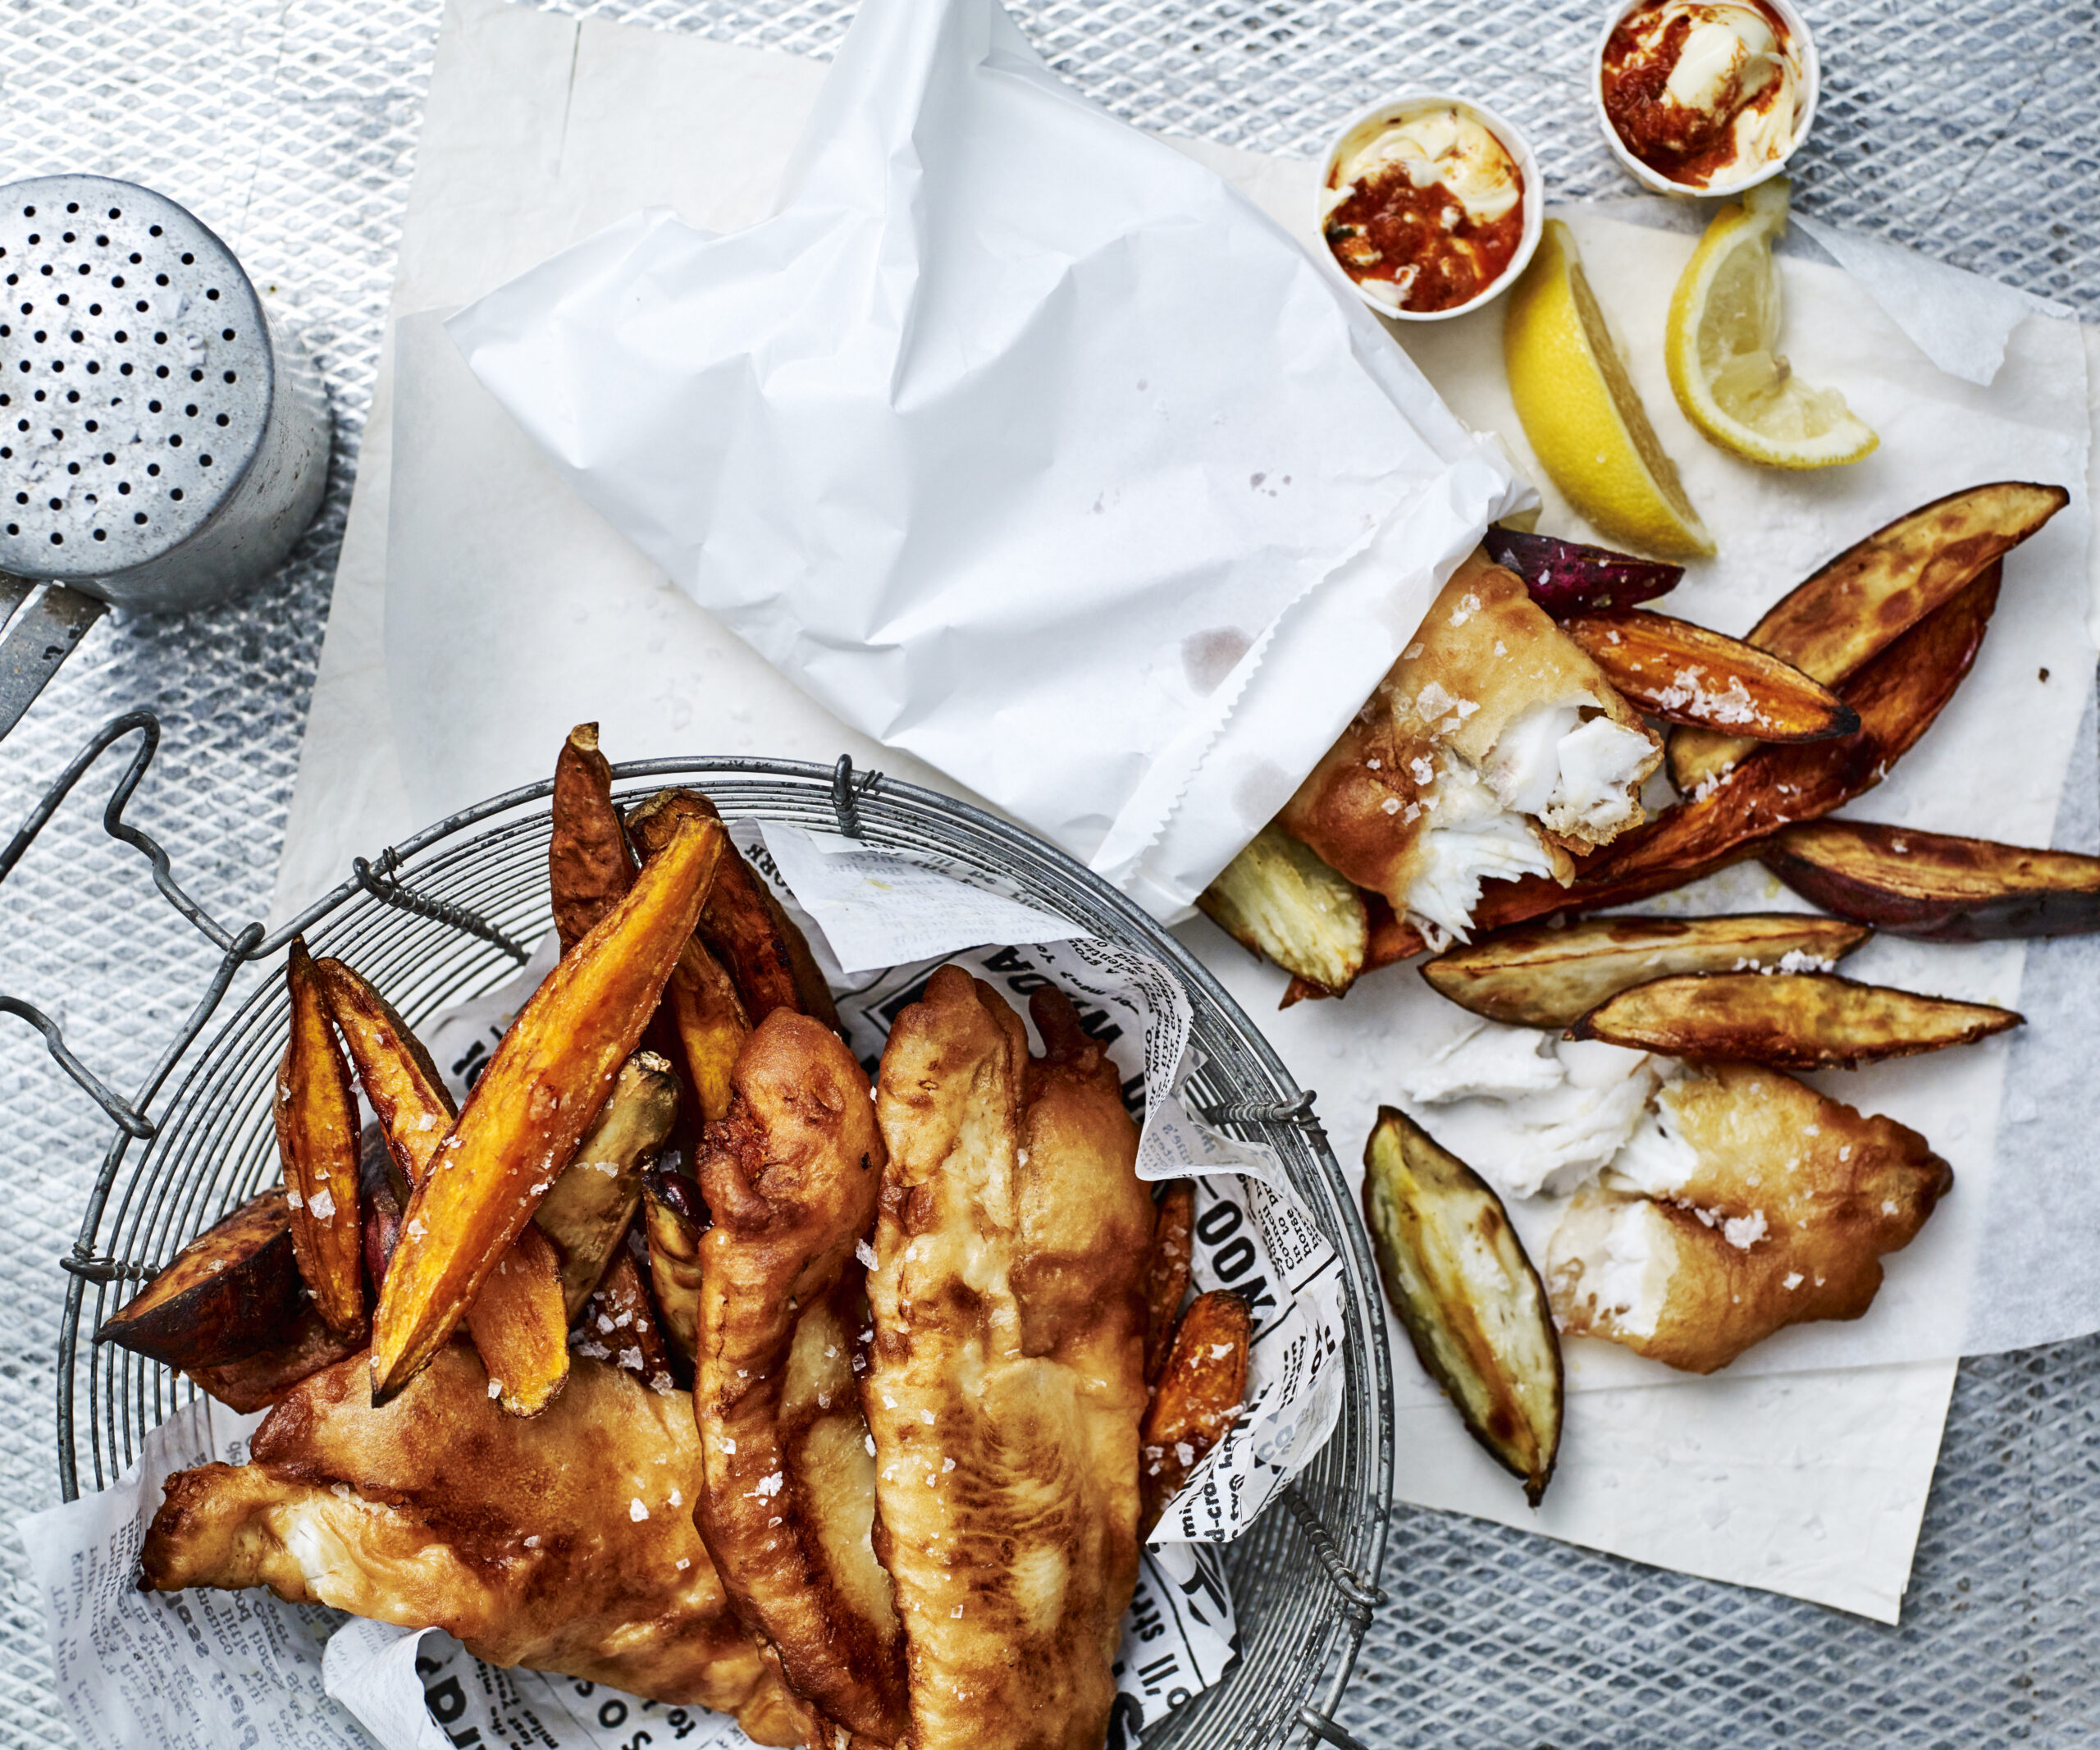 Cider-battered whiting with kimchi mayo